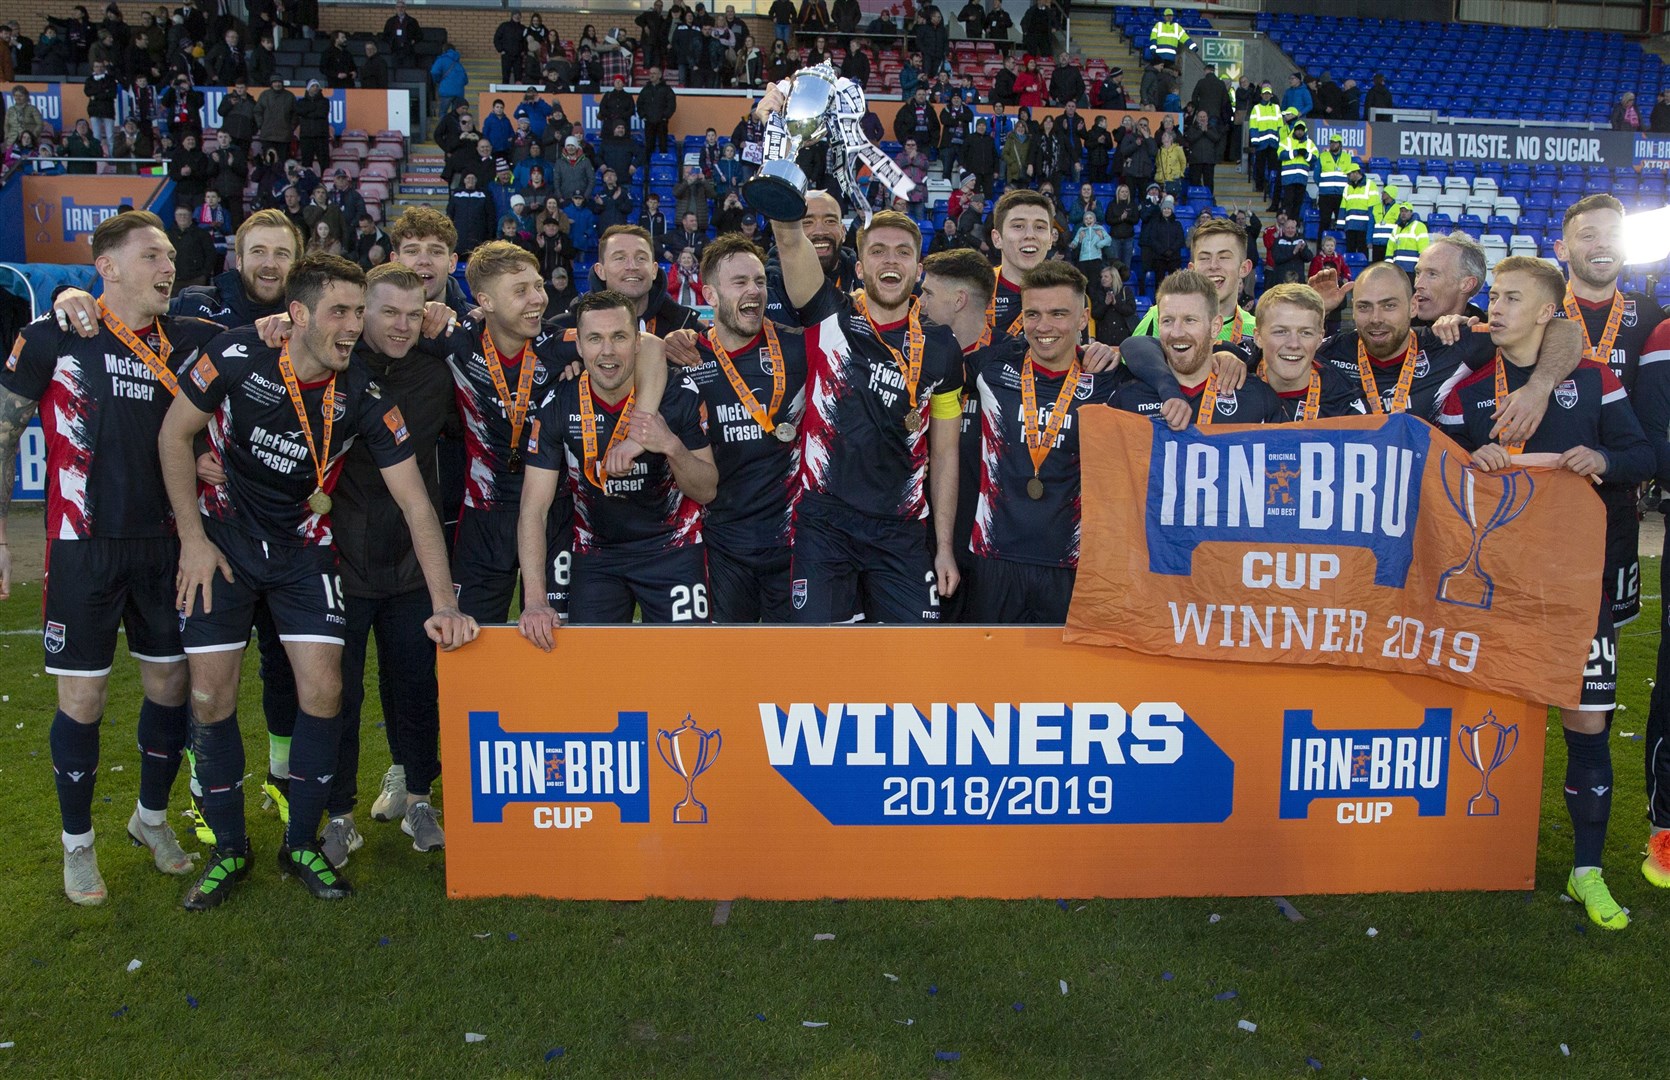 Ross County won the Challenge Cup in 2019.